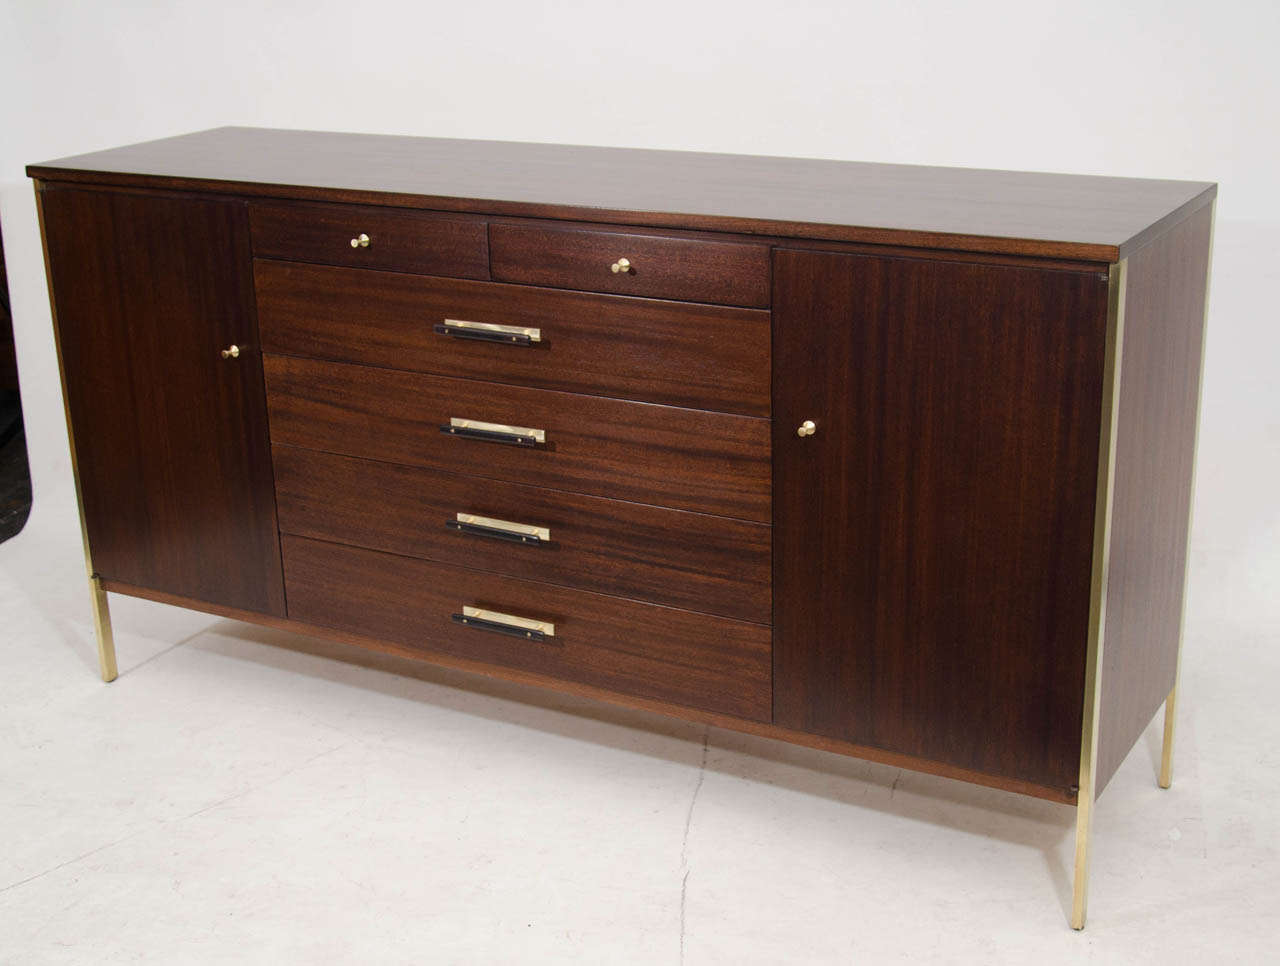 Very handsome dresser or credenza by Paul McCobb for the Calvin Group. Beautifully refinished in a rich brown stain and accented with brass frames that extend to the floor. Aspecial feature are the horizontal wood and brass pulls. Quite Nice!